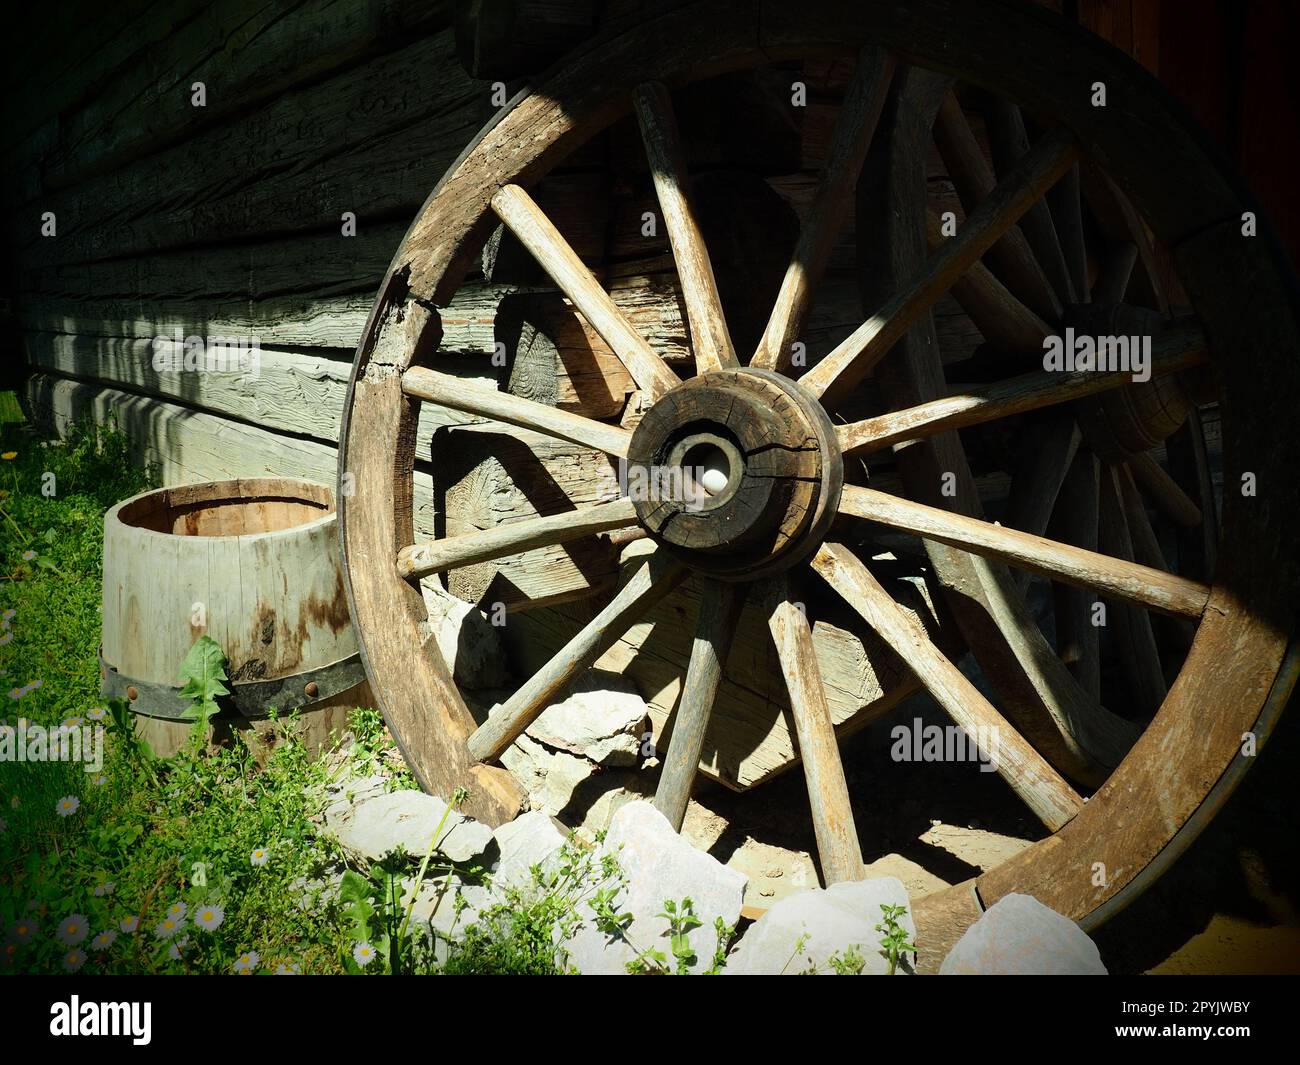 Wooden wheel from a cart. Decorative wheels for decorating lawns, exteriors and rustic interiors. Round homemade wheel against the wall. Retro or vintage style. Life in the countryside Stock Photo